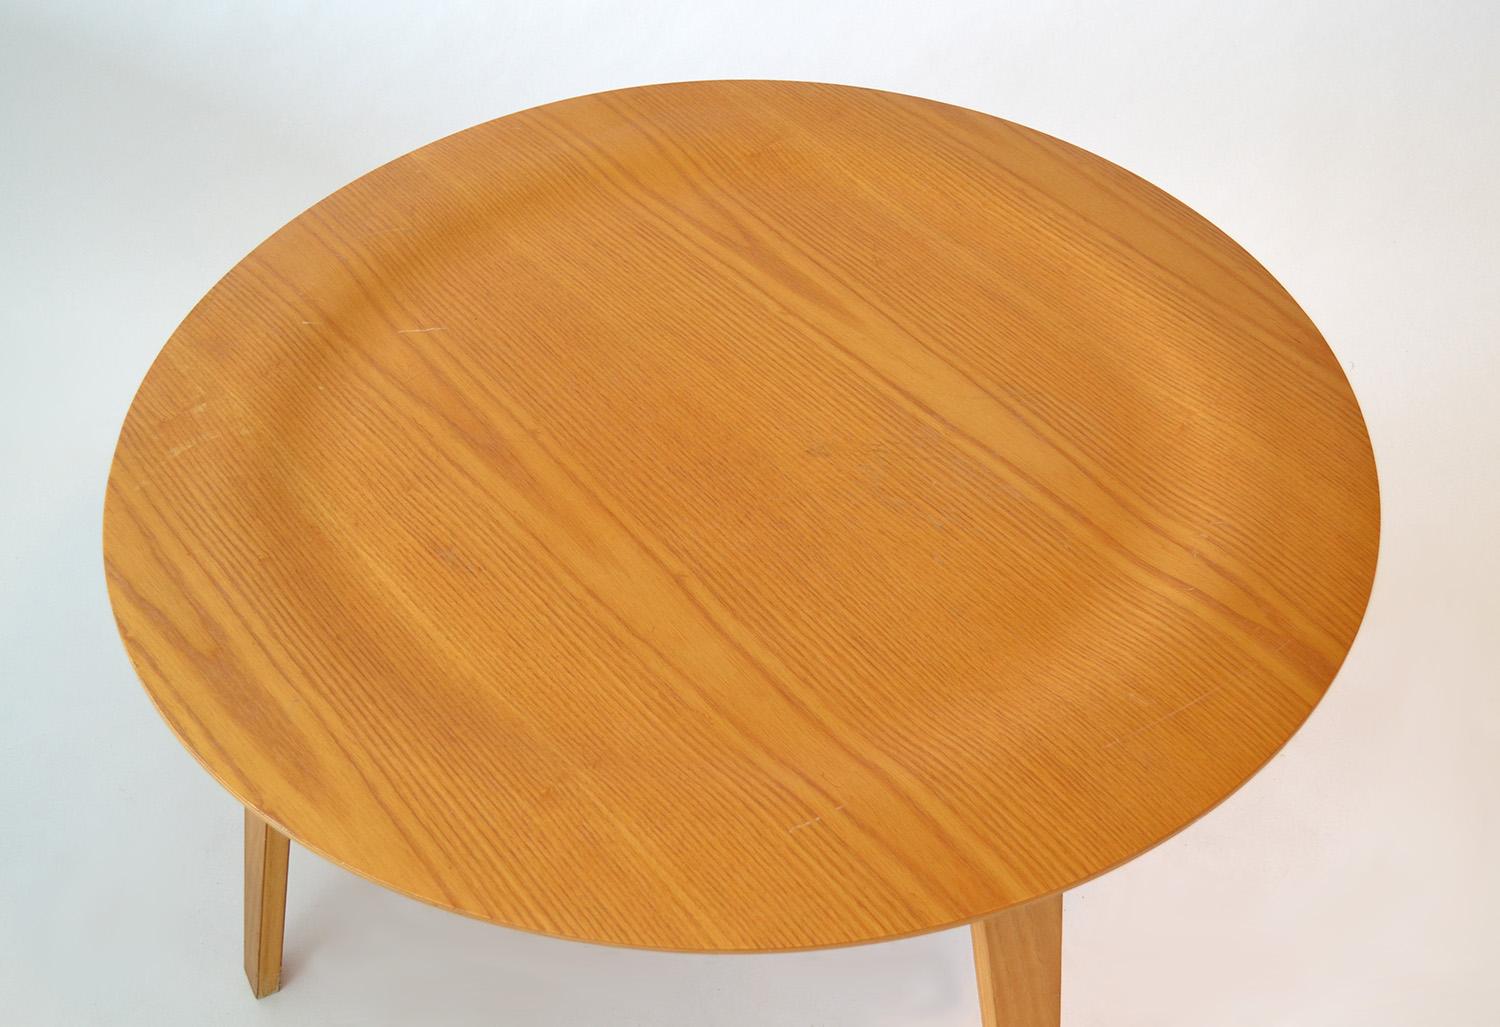 Charles and Ray Eames CTW Coffee Table in Plywood Herman Miller 2000s In Good Condition For Sale In Ft Lauderdale, FL